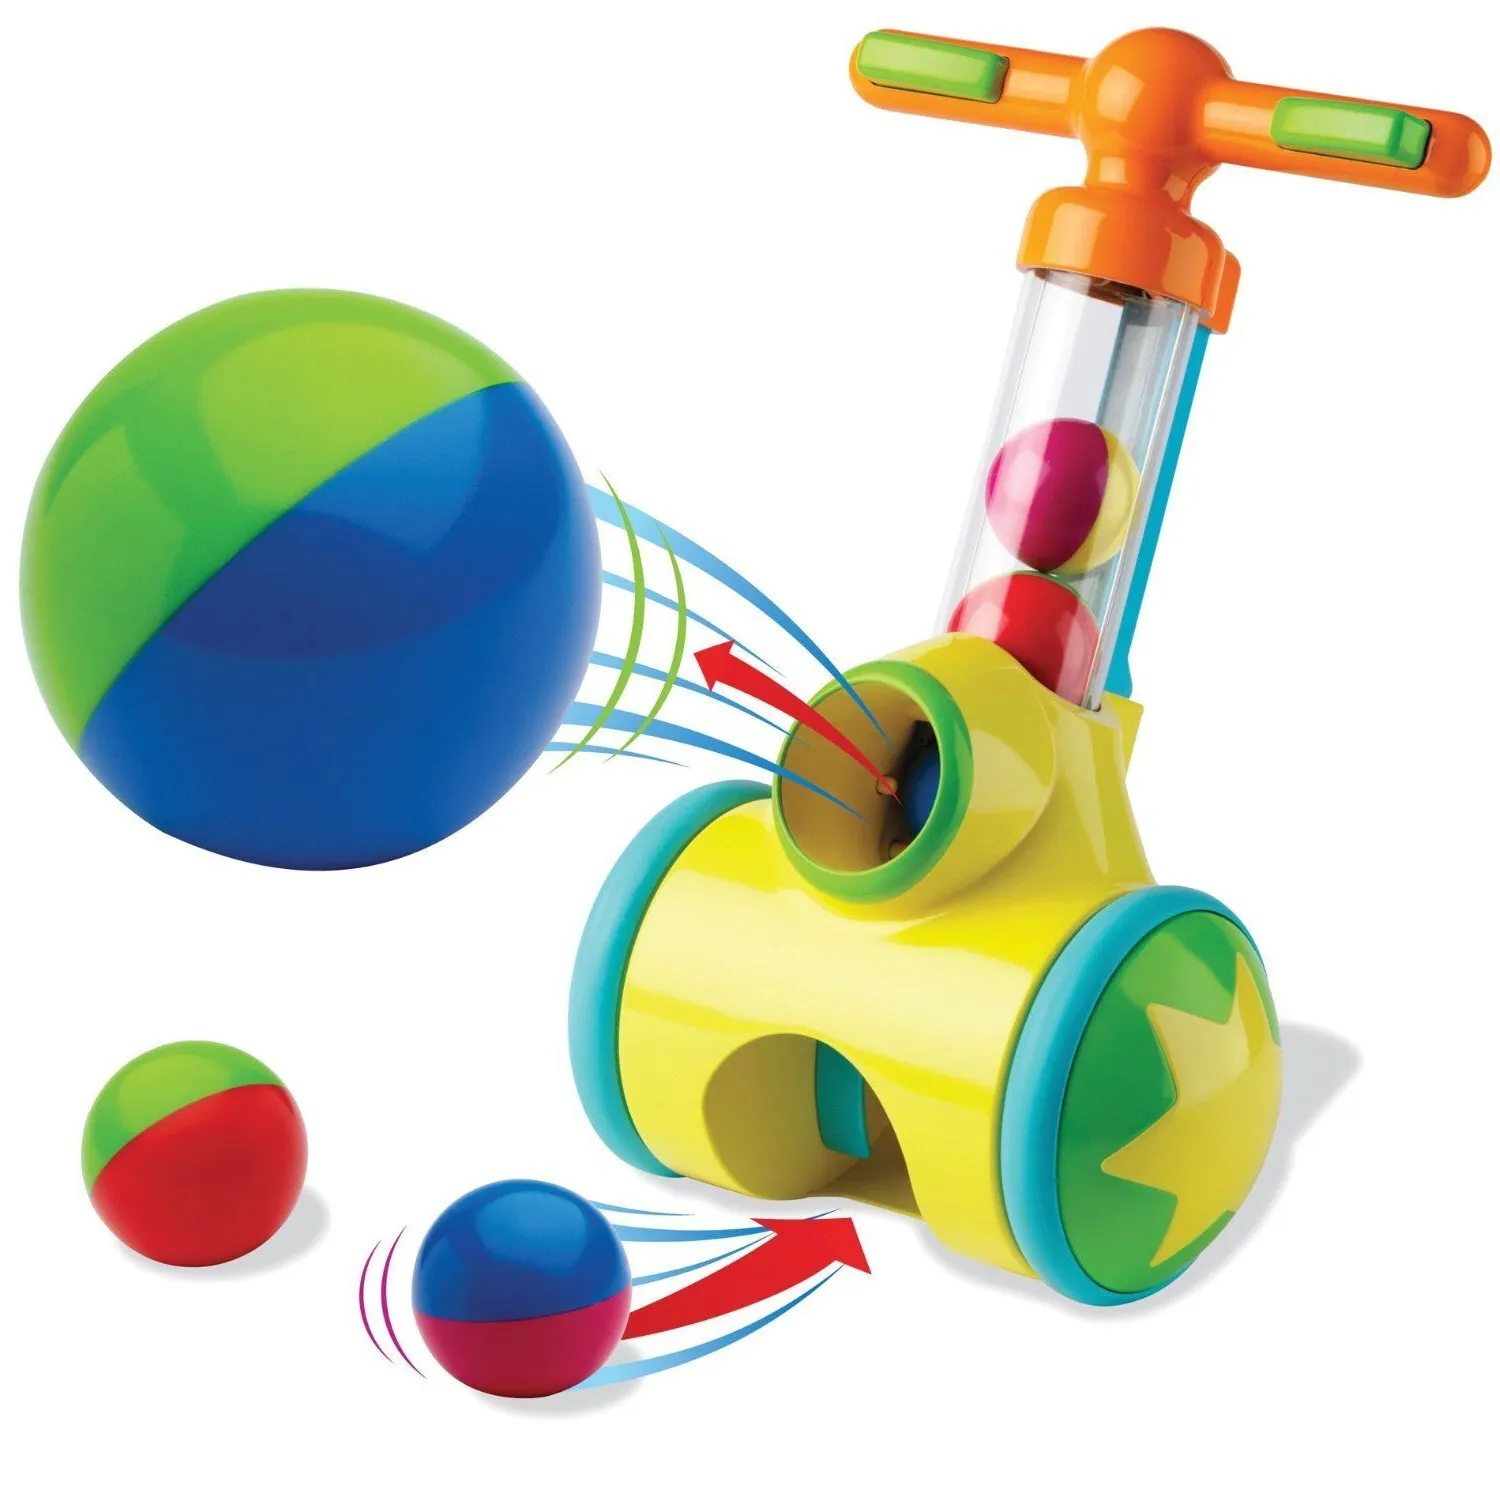 Free Tomy Toys For Product Testers